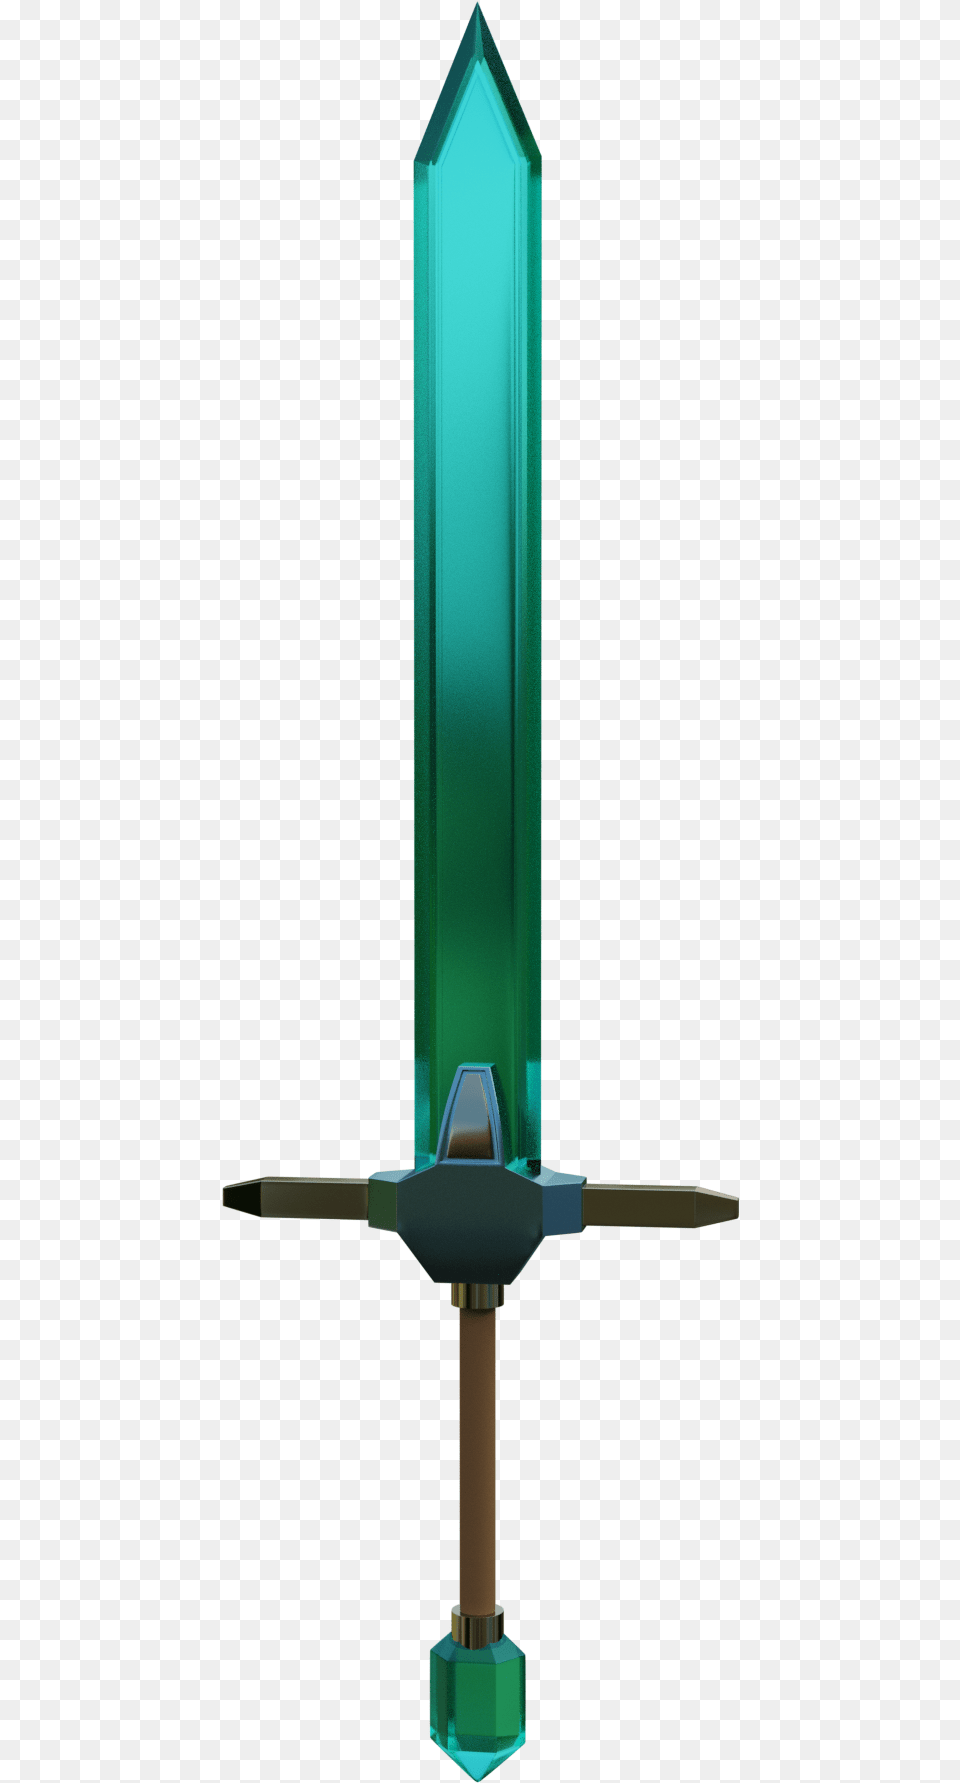 Realistic Minecraft Diamond Sword, Weapon, Accessories, Gemstone, Jewelry Free Png Download